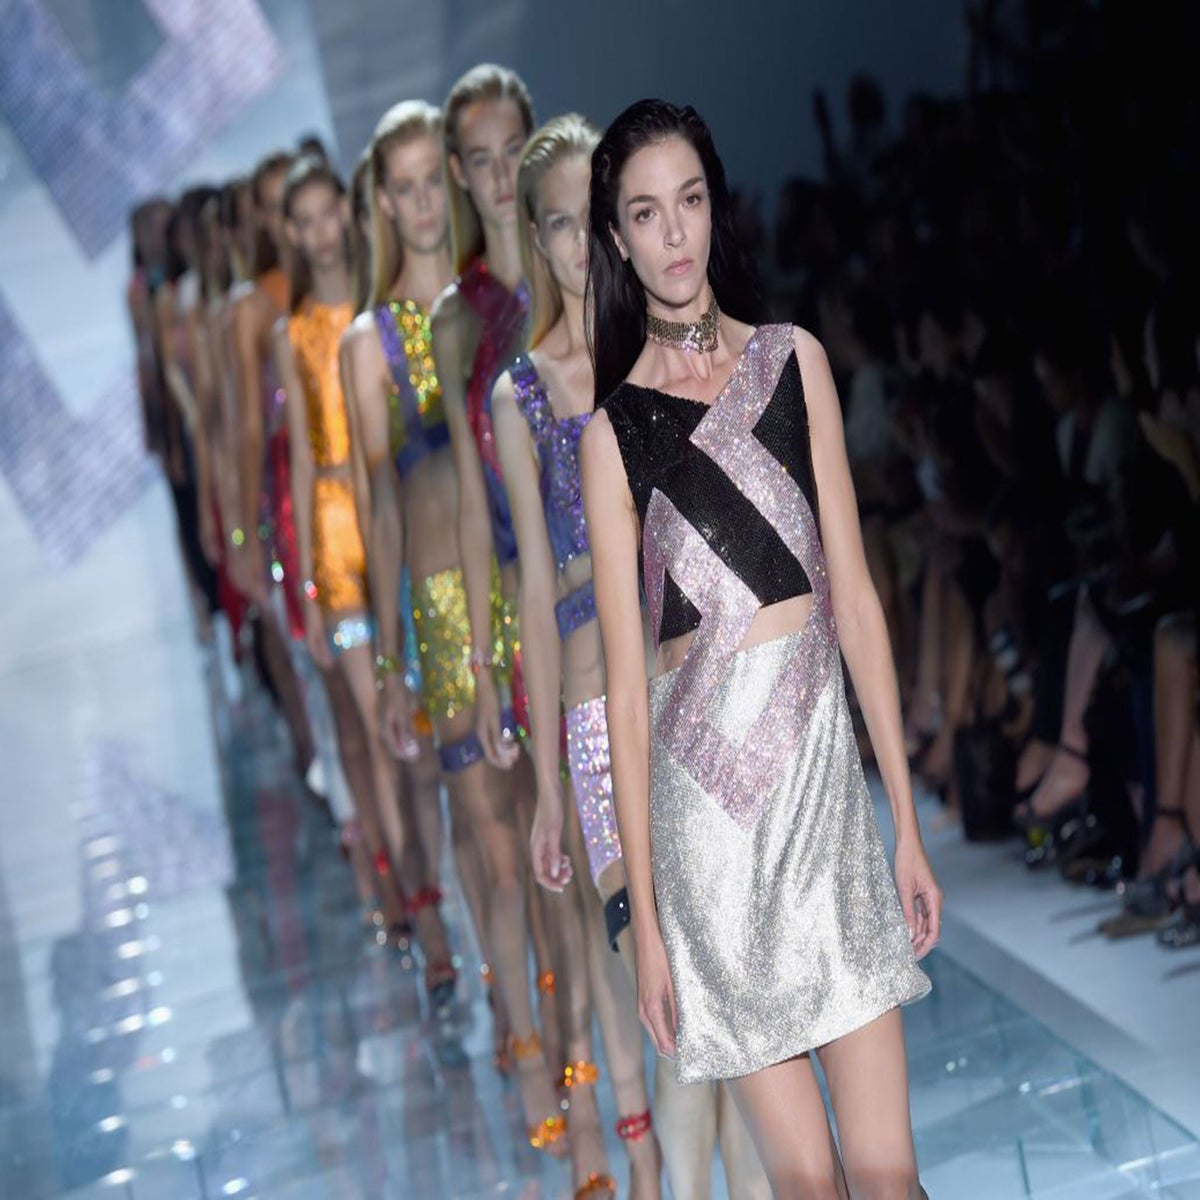 Versace Catwalk book features more than 40 years of looks